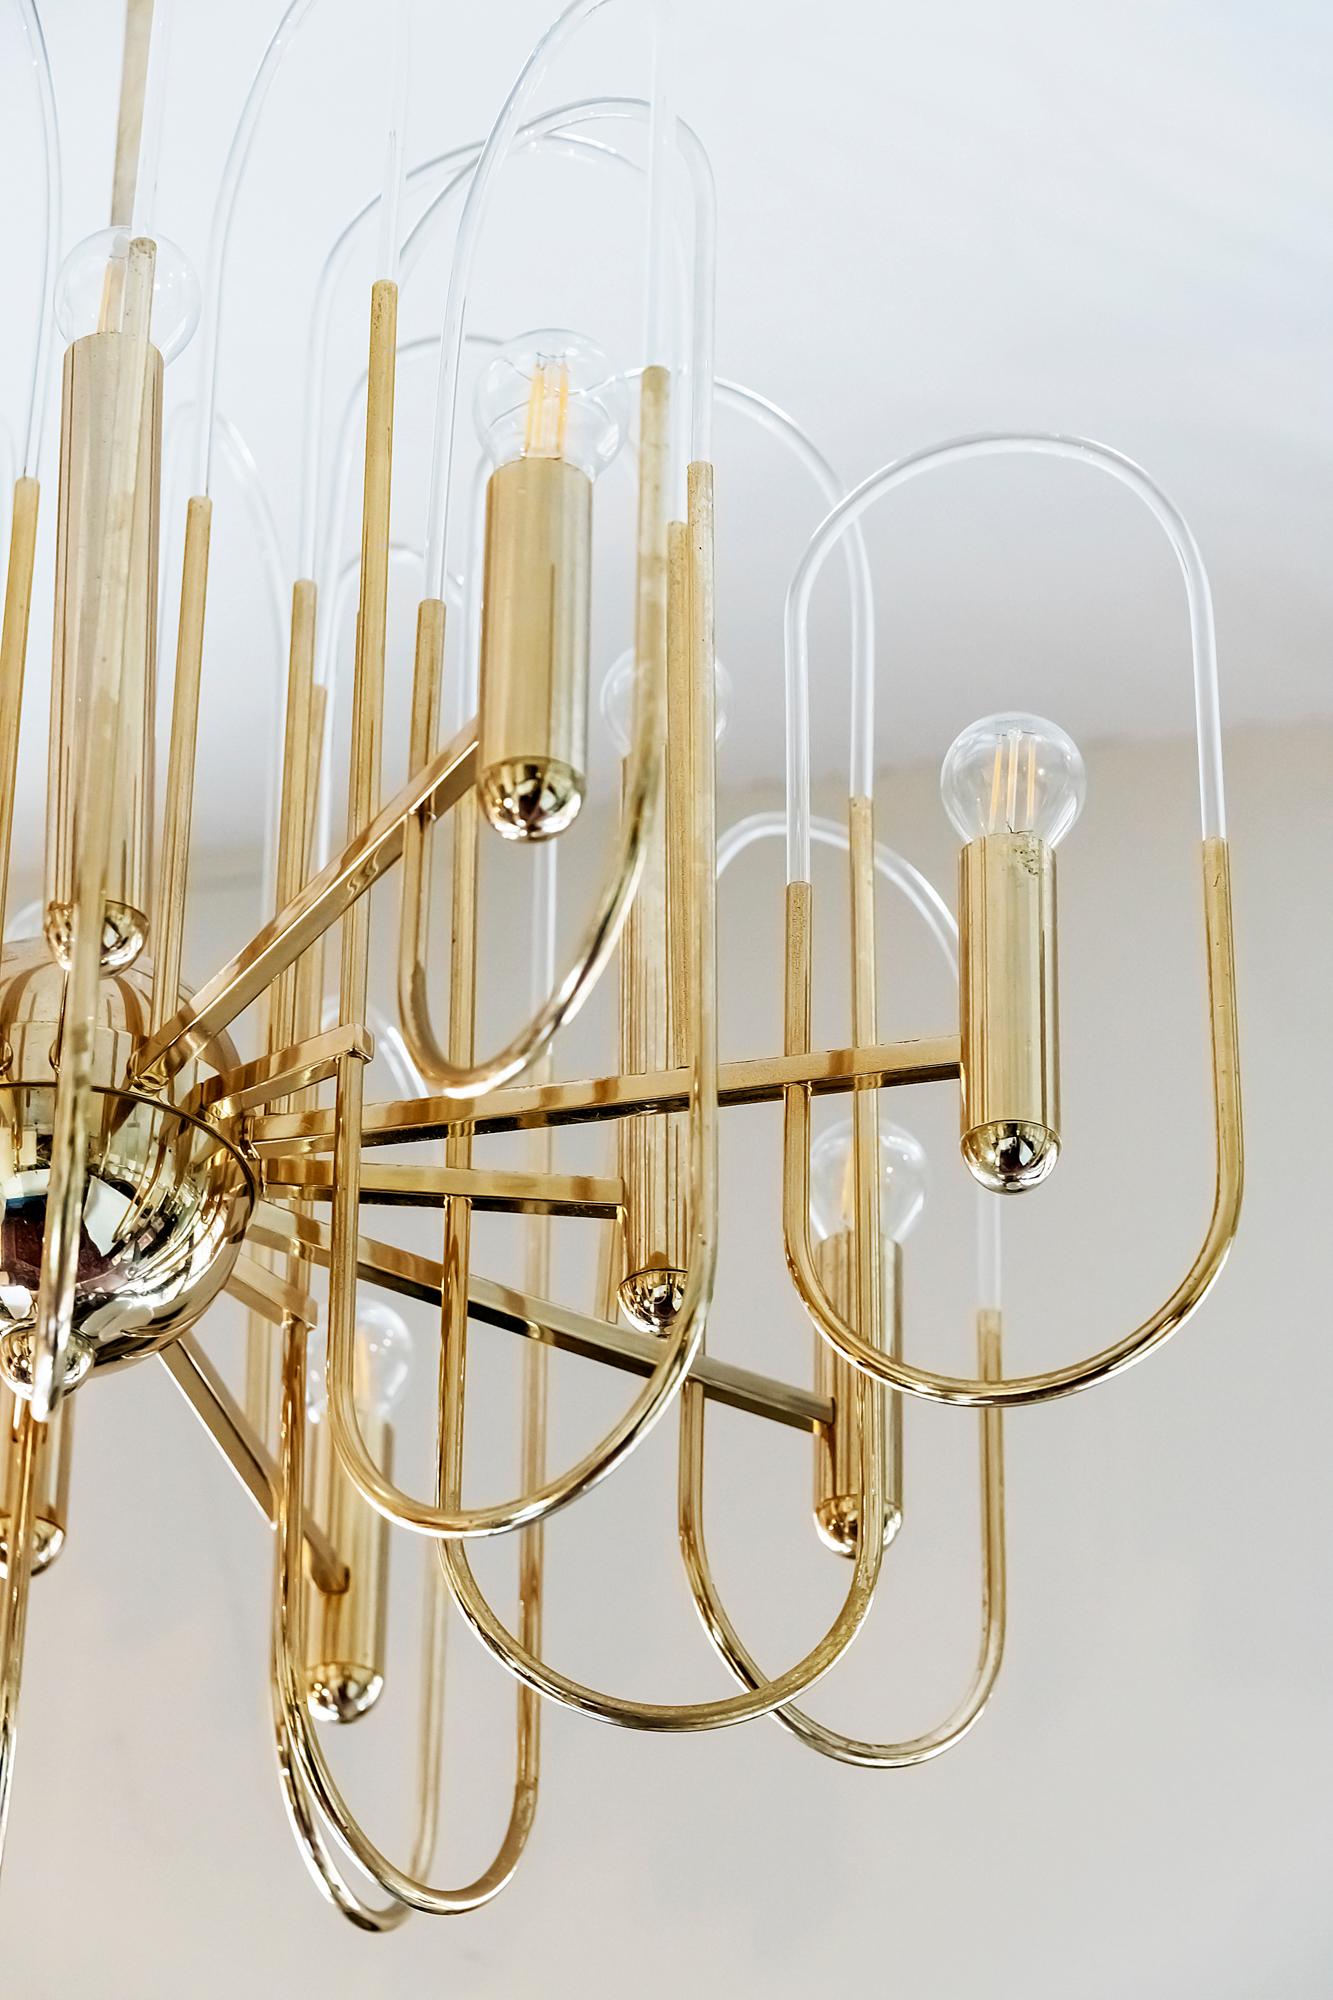 Hand-Crafted Midcentury Italian Brass and Glass Chandelier by Sciolari